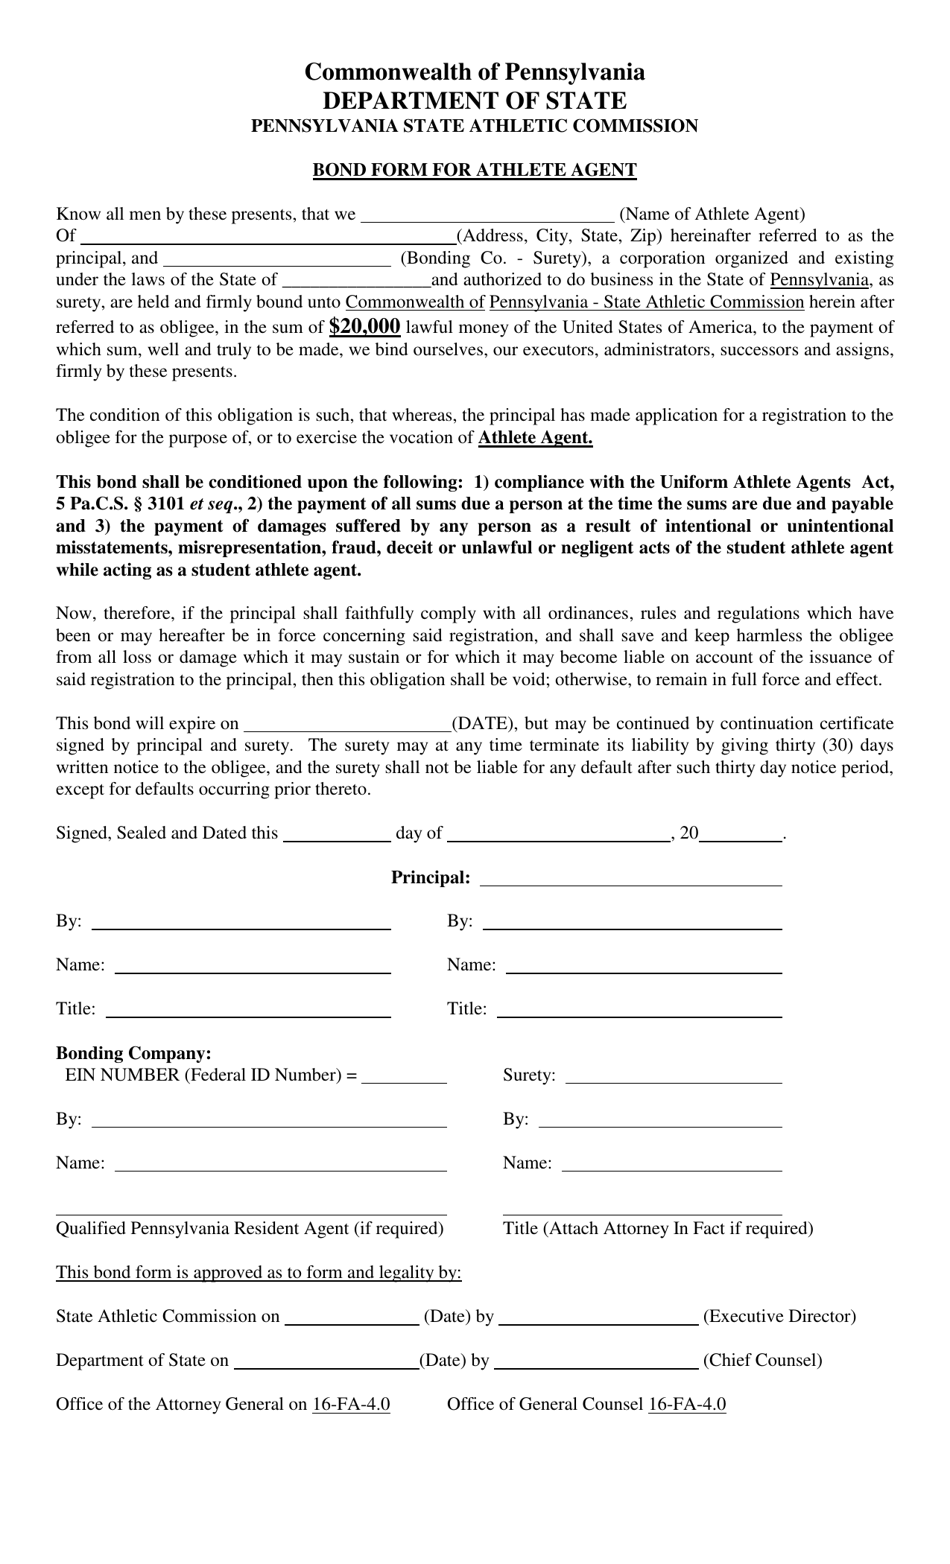 Bond Form for Athlete Agent - Pennsylvania, Page 1